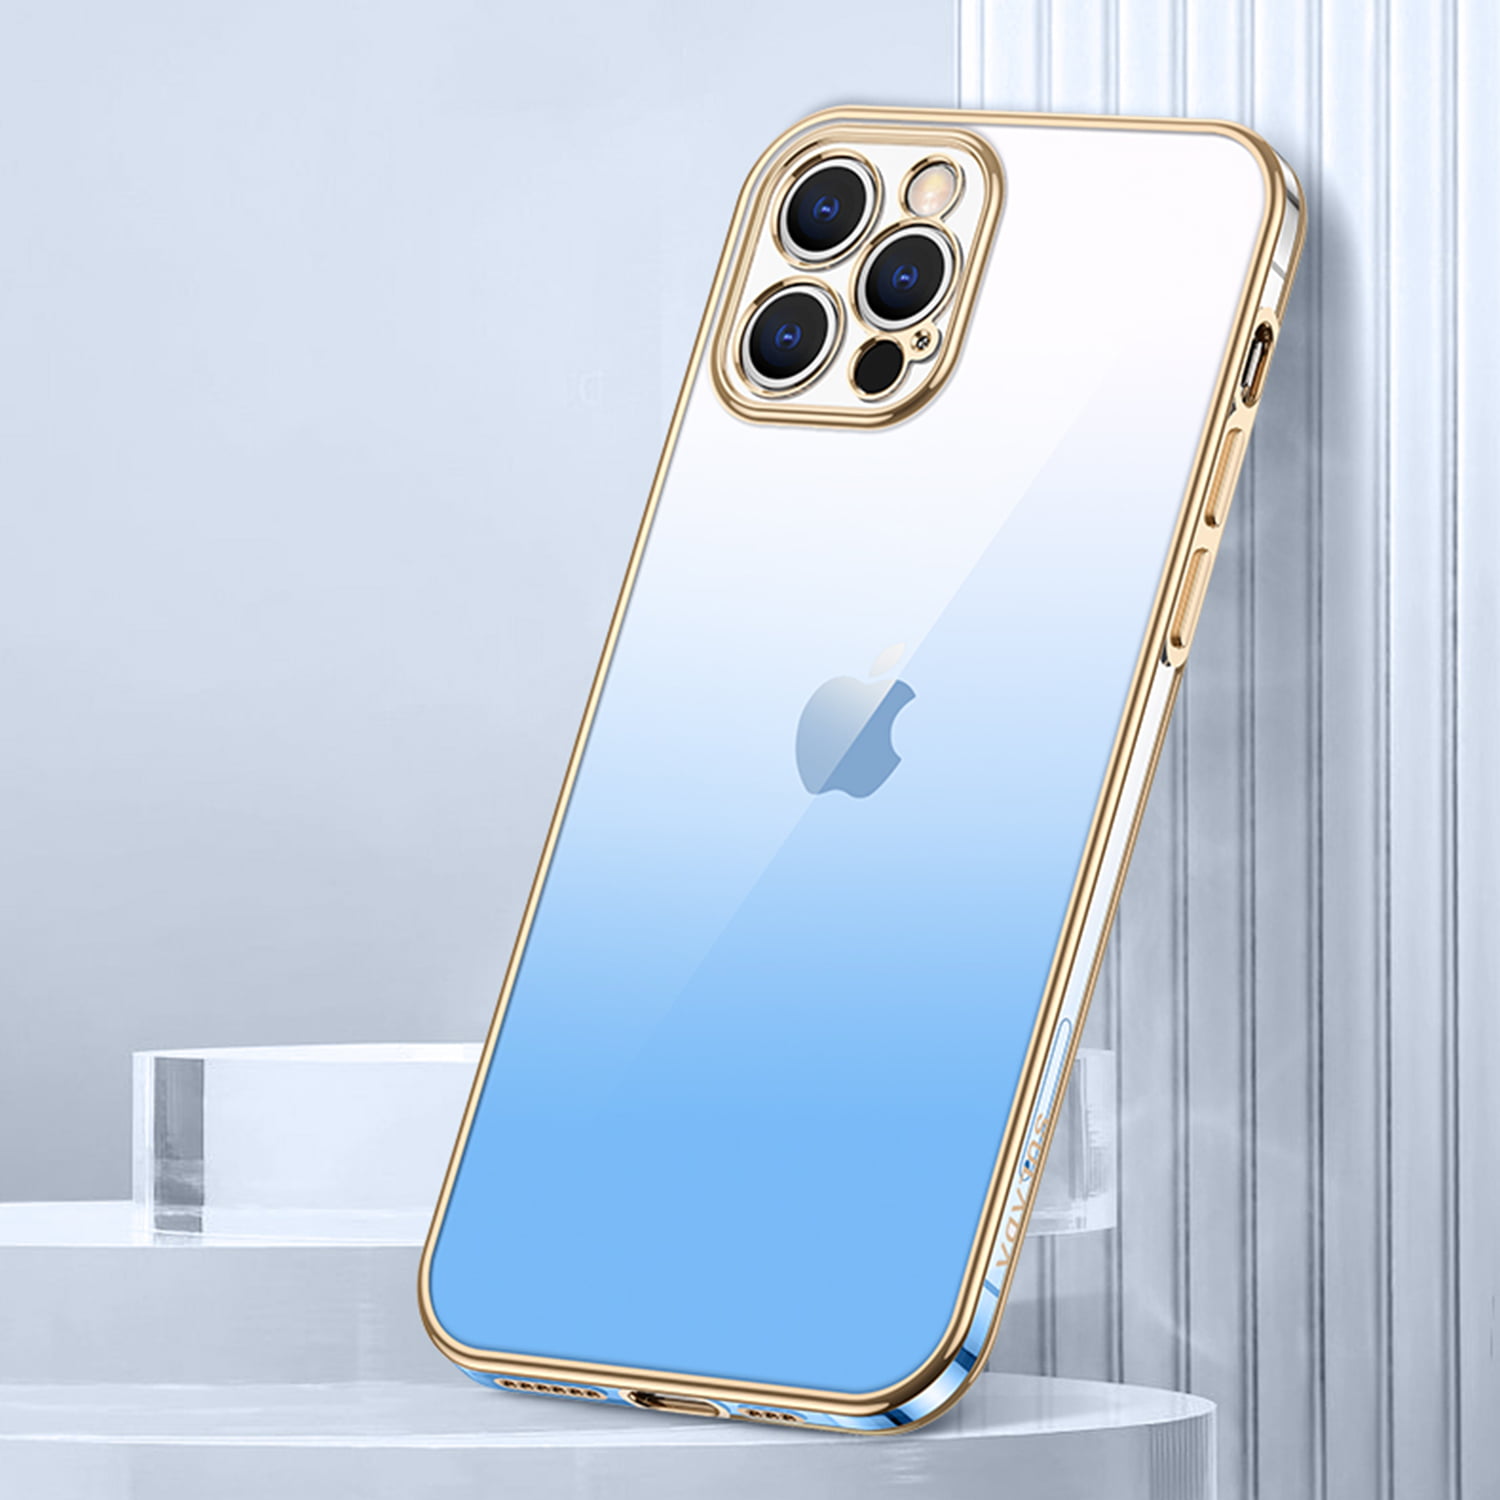 Shop Apple iPhone 13 Cases For Pro, Pro Max, and Mini Sizes